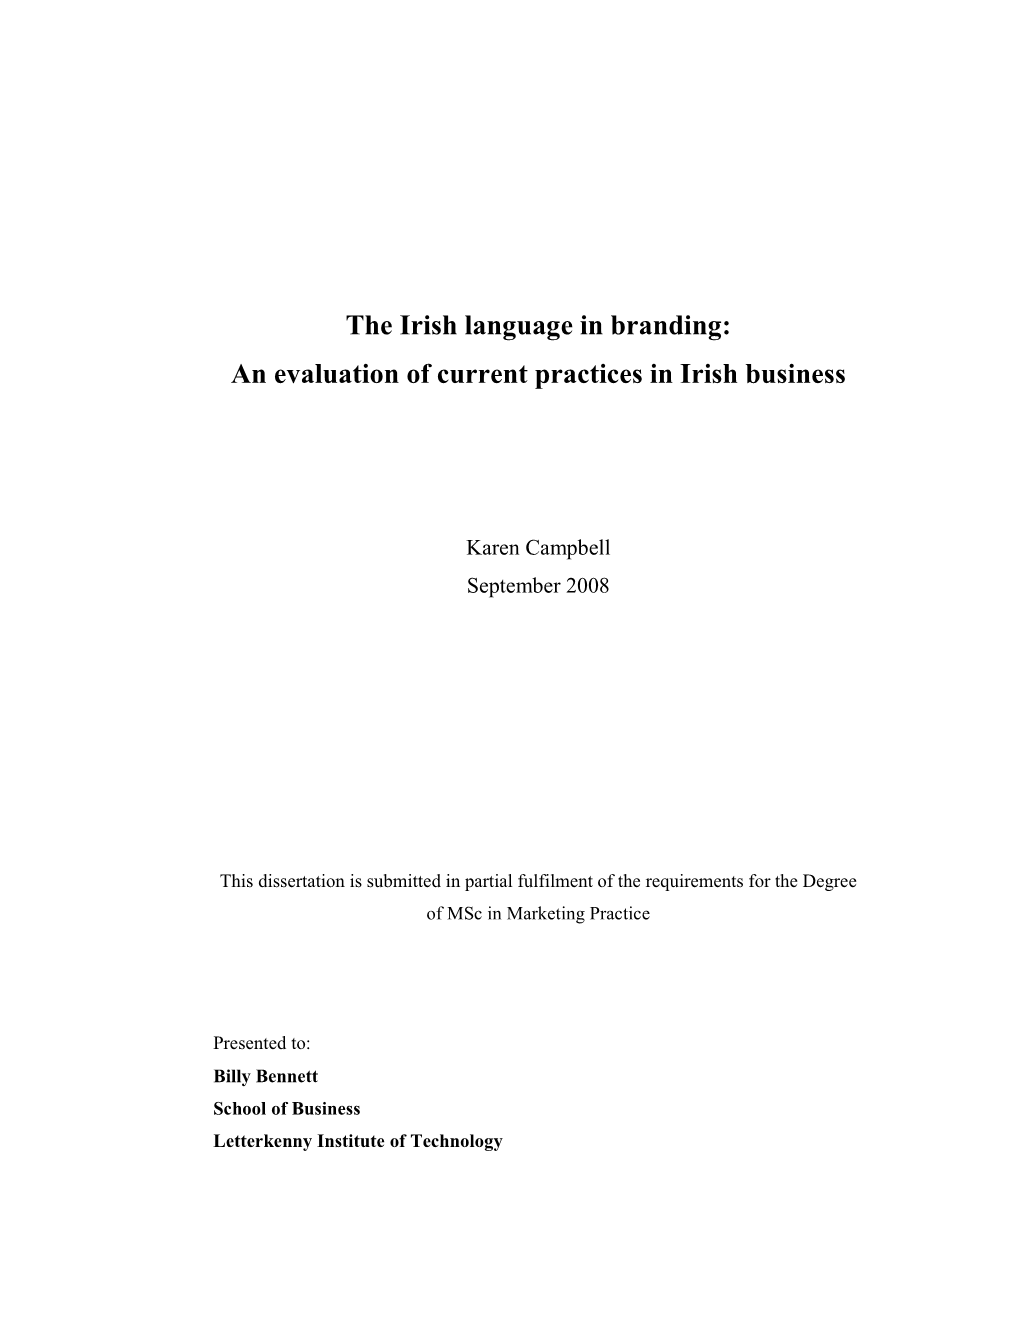 The Irish Language in Branding: an Evaluation of Current Practices in Irish Business